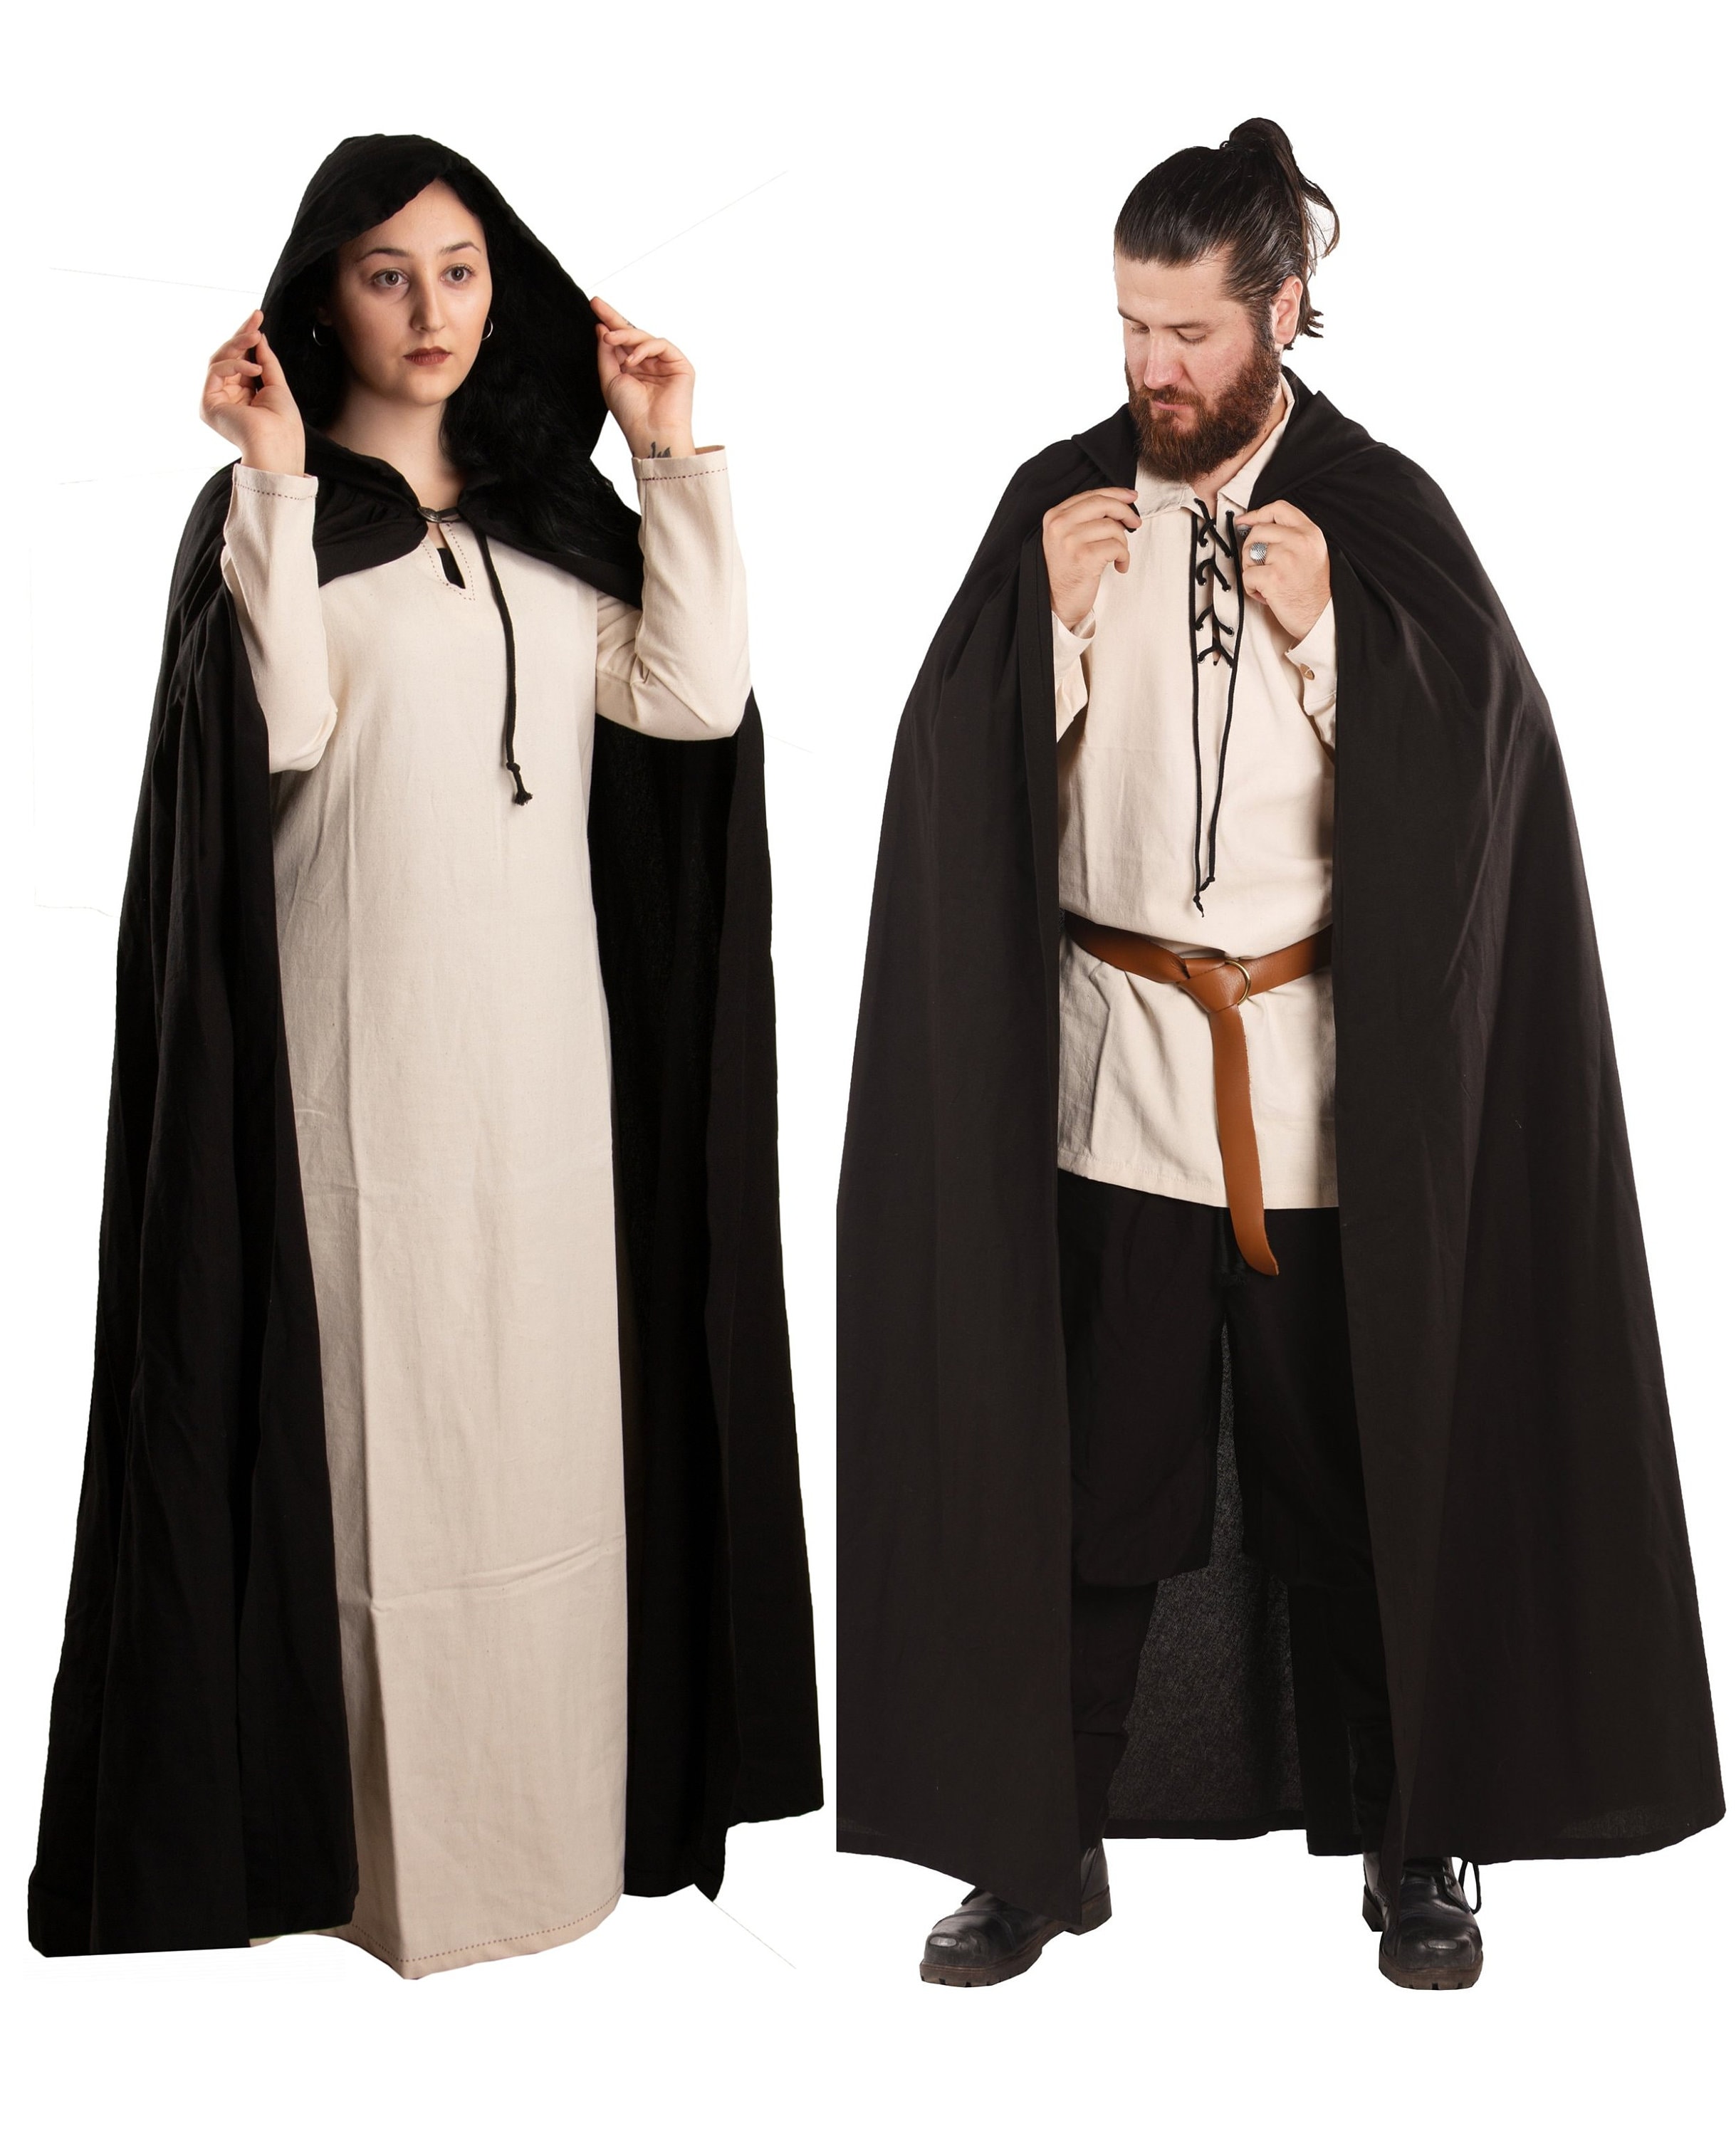 Medieval-Pagan-Gothic-Cosplay-Larp-FULL LENGTH BROWN HOODED CLOAK 